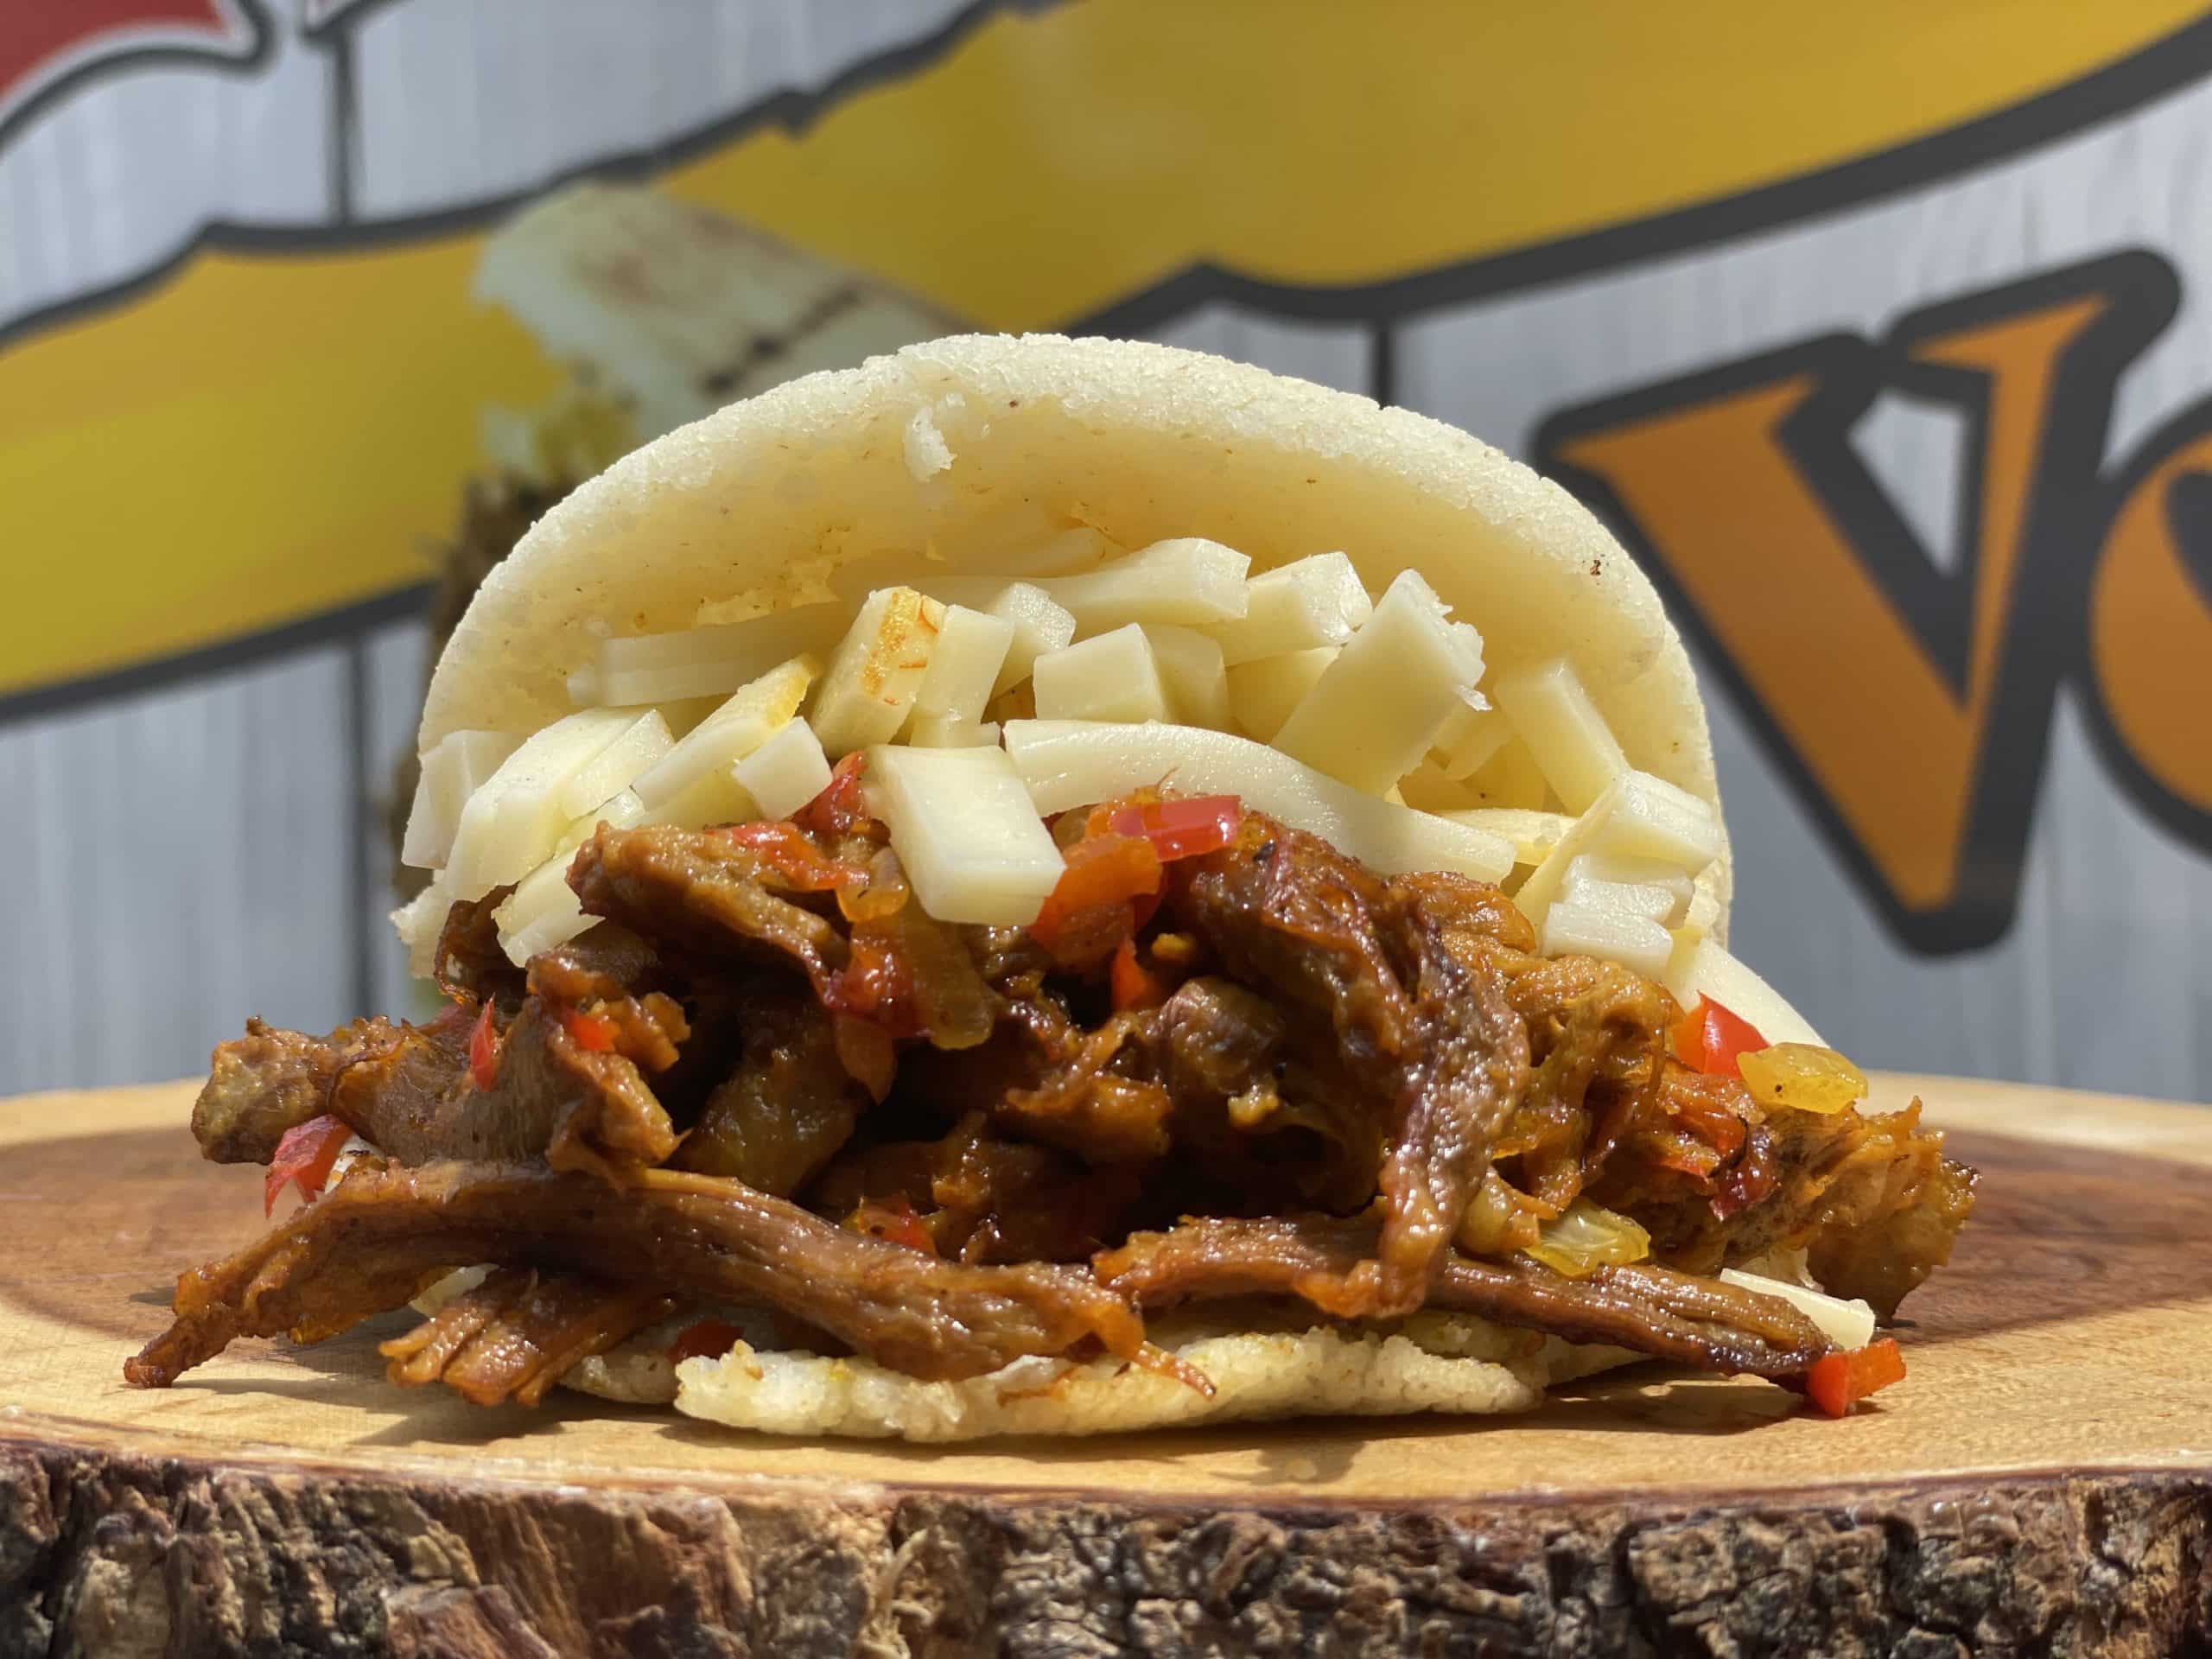 Shredded Beef and Gouda Cheese Arepa from Caripito's Venezuelan Food Truck